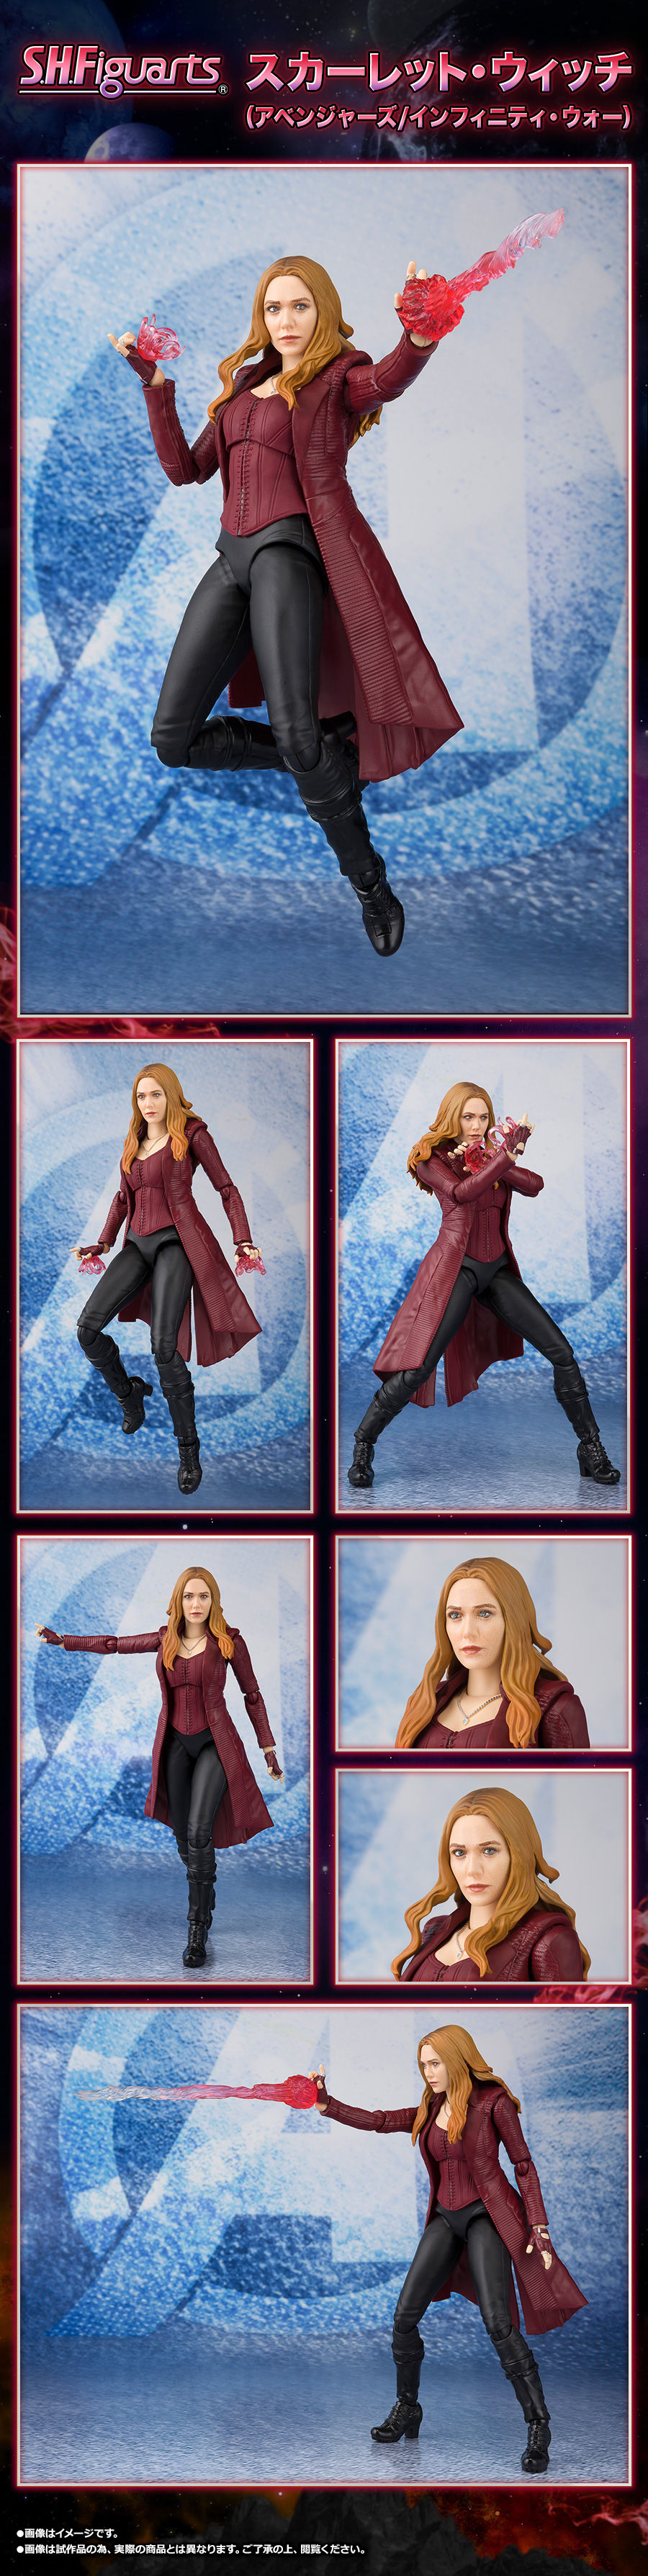 S.H.Figuarts Scarlet Witch (Avengers: Infinity War) Action Figure